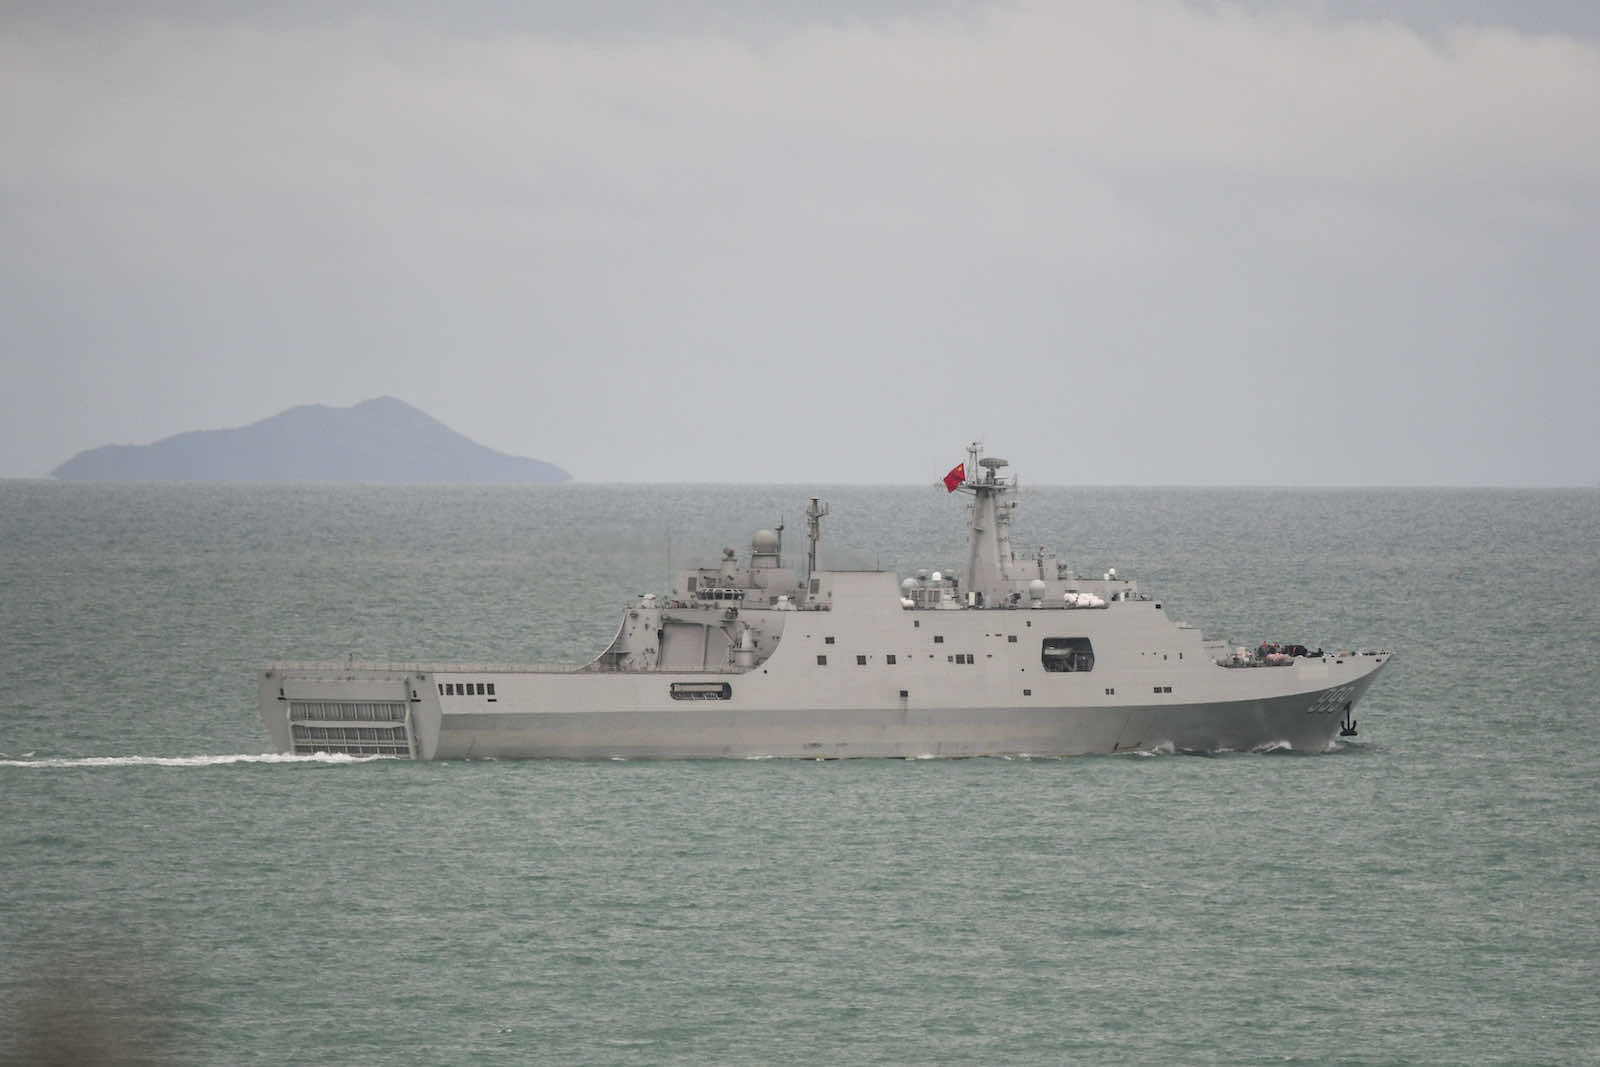 A PLA-N Yuzhao-class amphibious transport dock vessel transiting the Torres Strait on 18 February, a day after the reported lasing of a RAAF P-8A (Department of Defence)